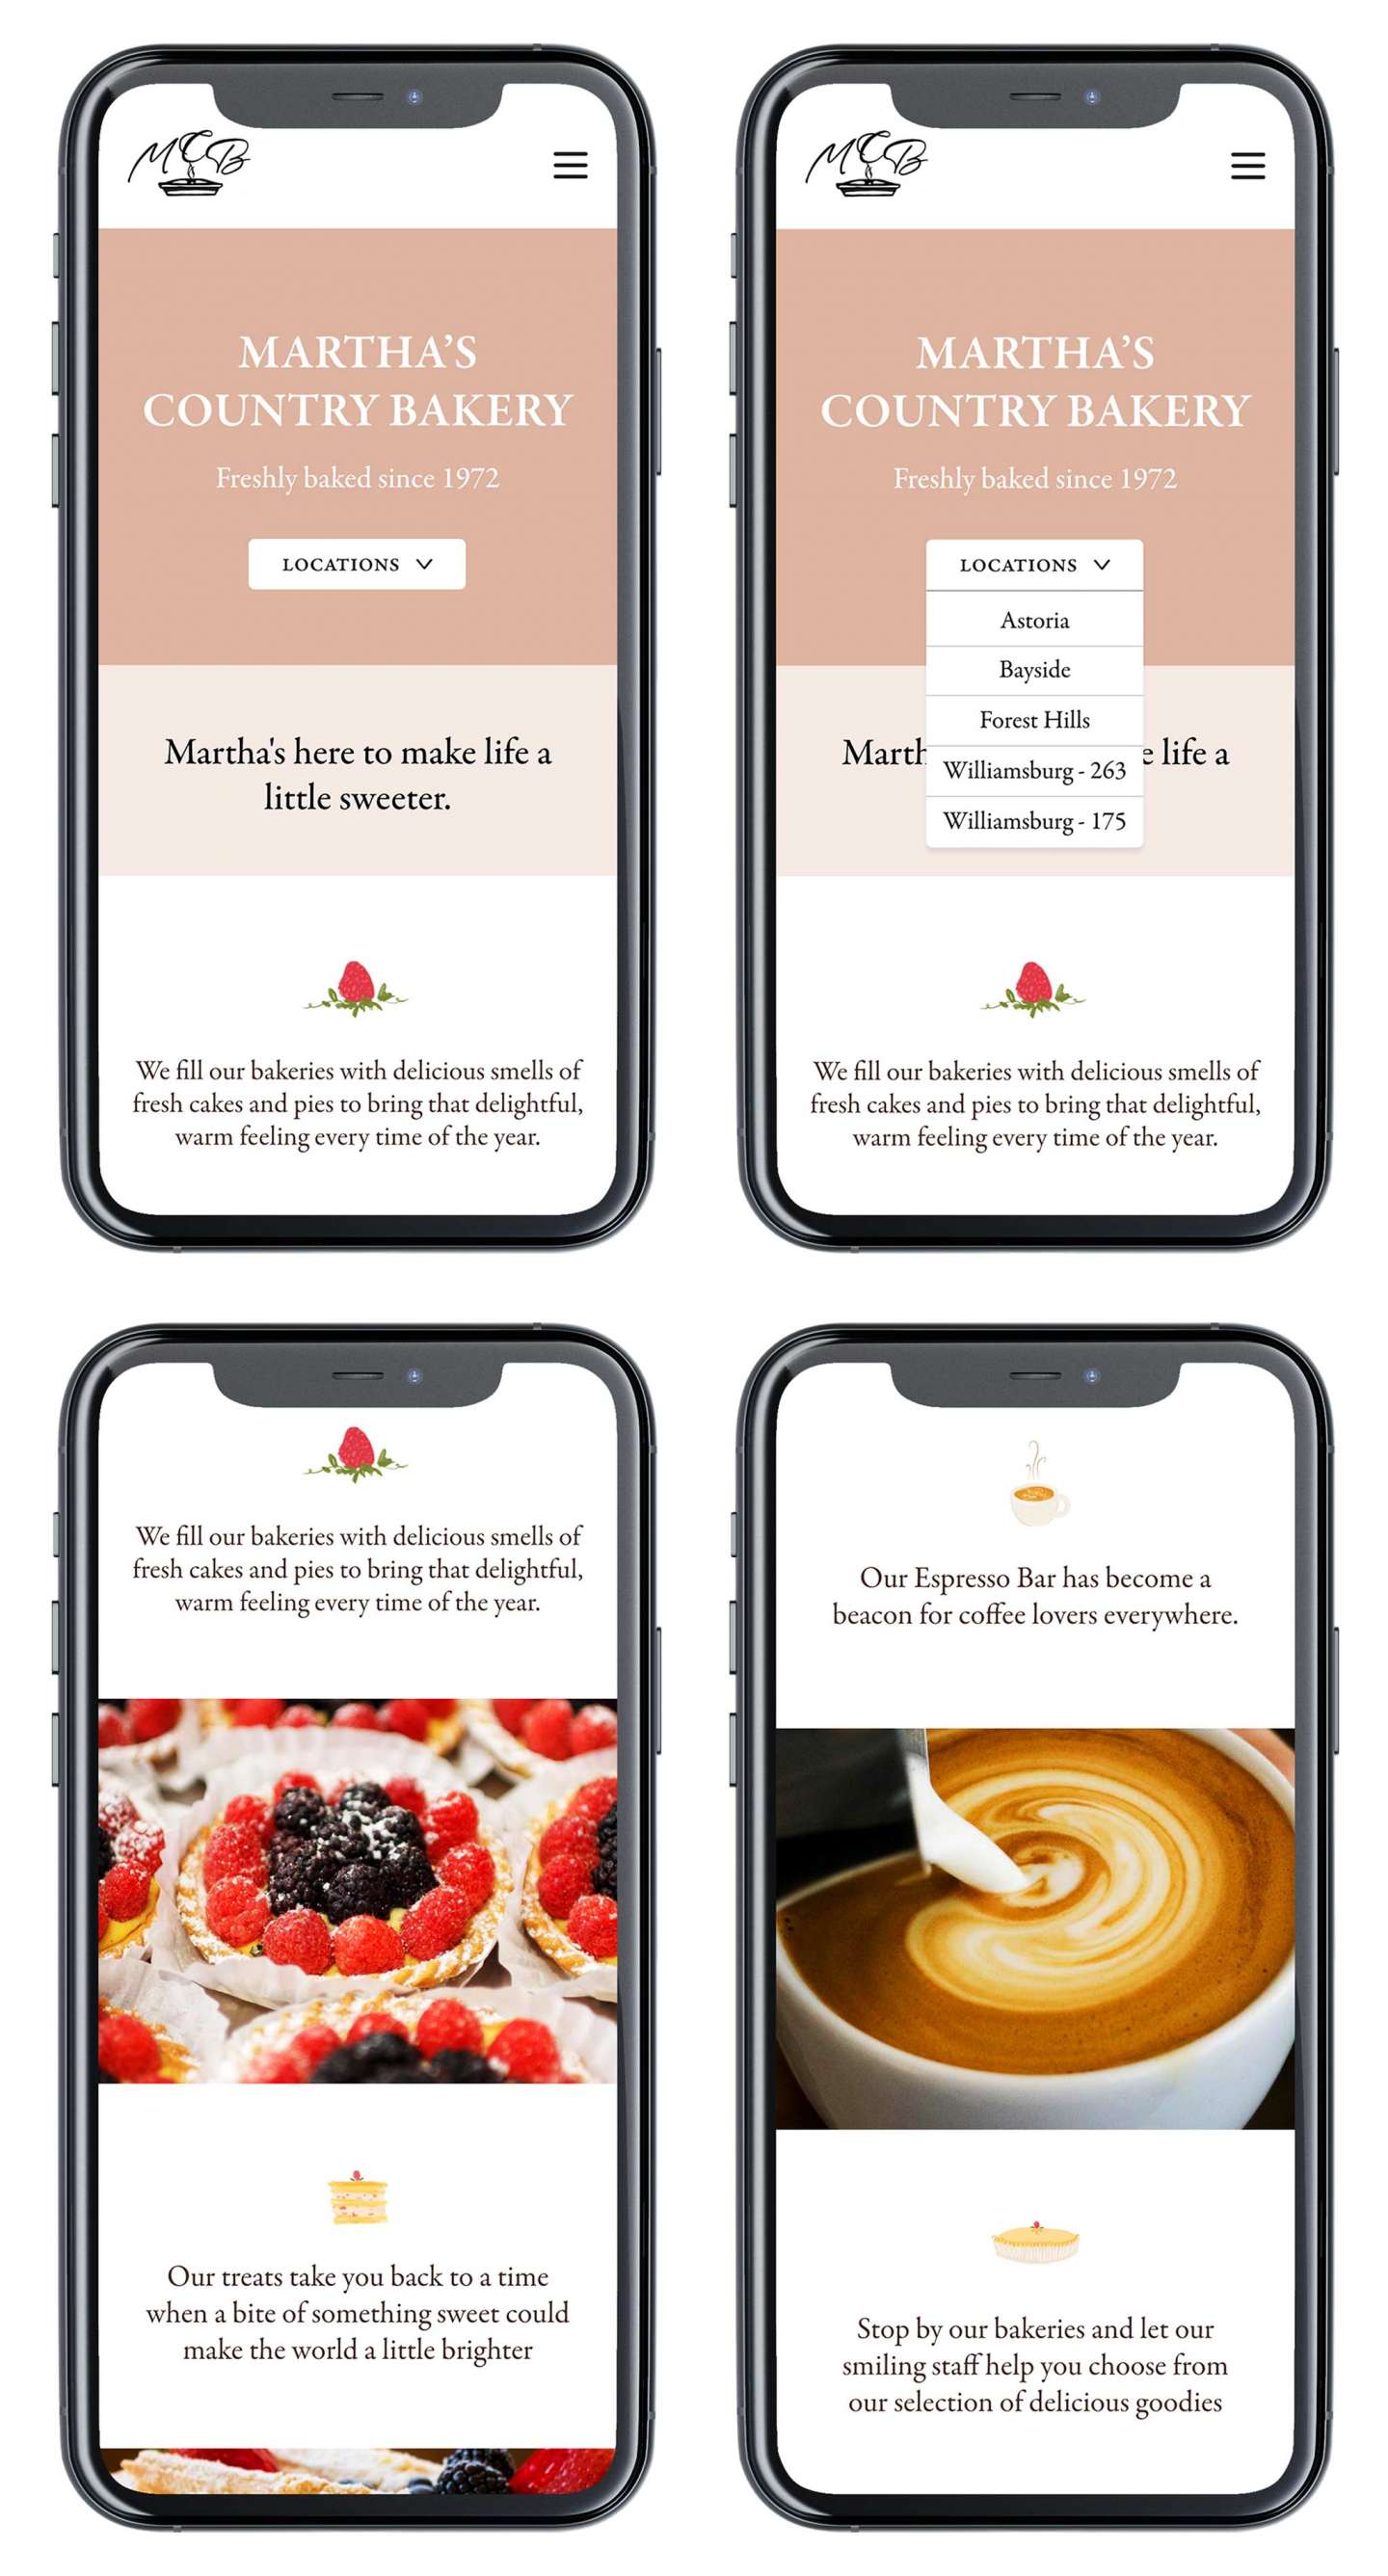 Martha's Bakery Site Redesign